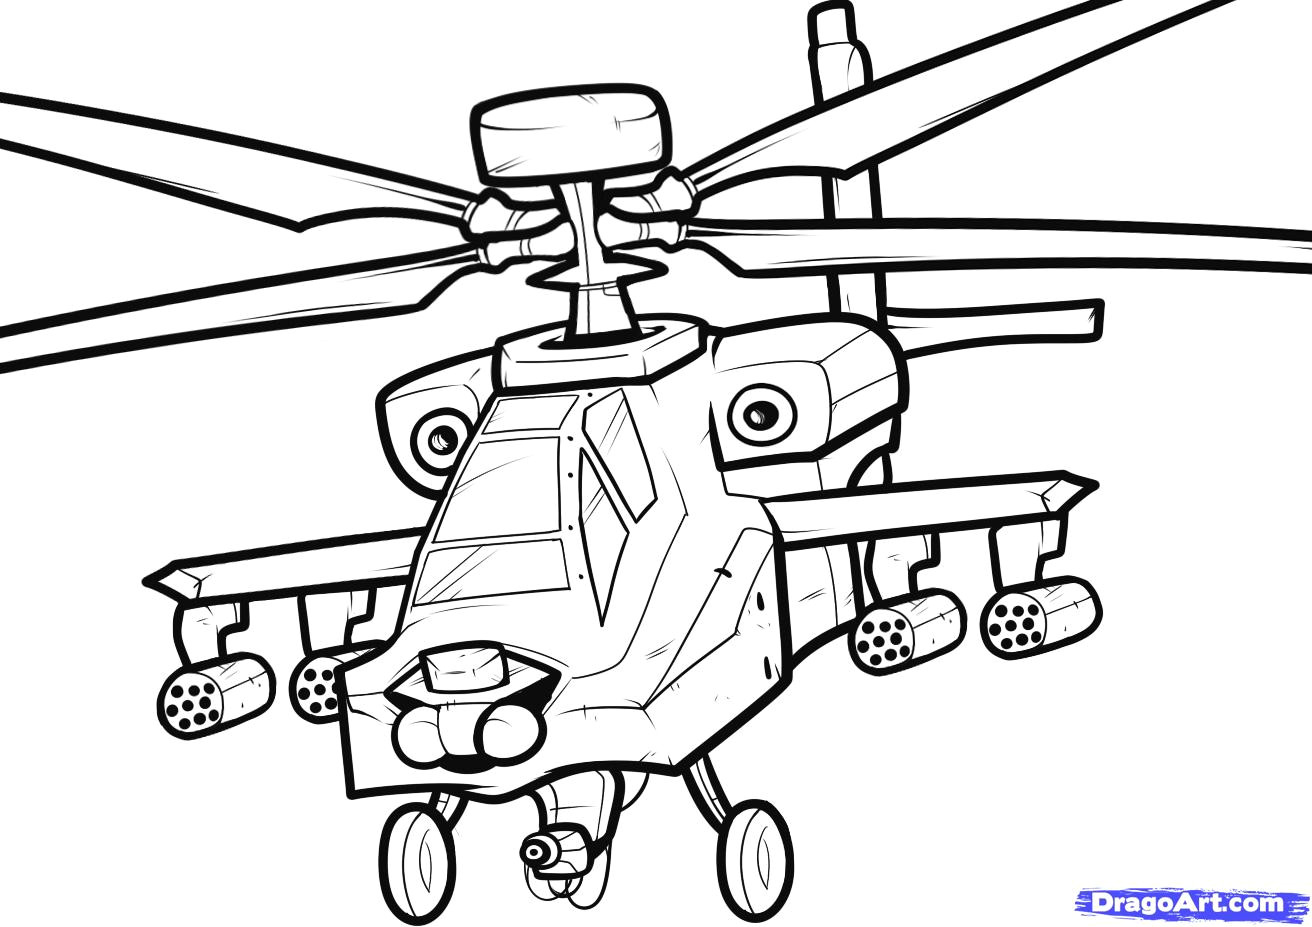 how to draw an apache apache helicopter step 9 1 000000089527 5 jpg